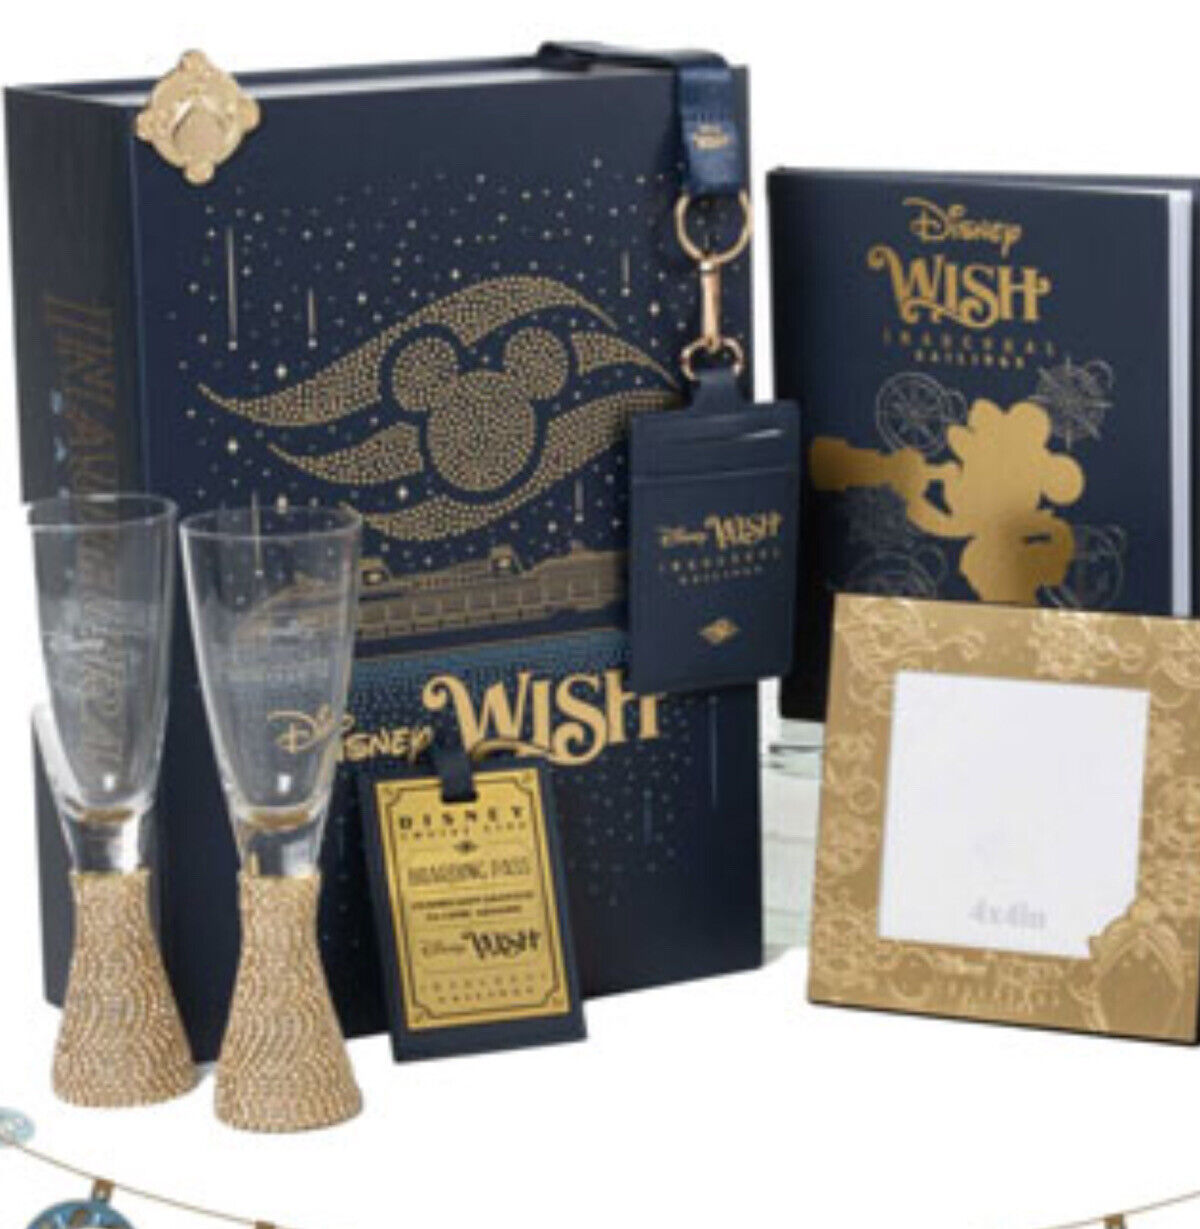 Disney Wish Enchantment Package Gift Set Limited To Wish Inaugural Sailings Only